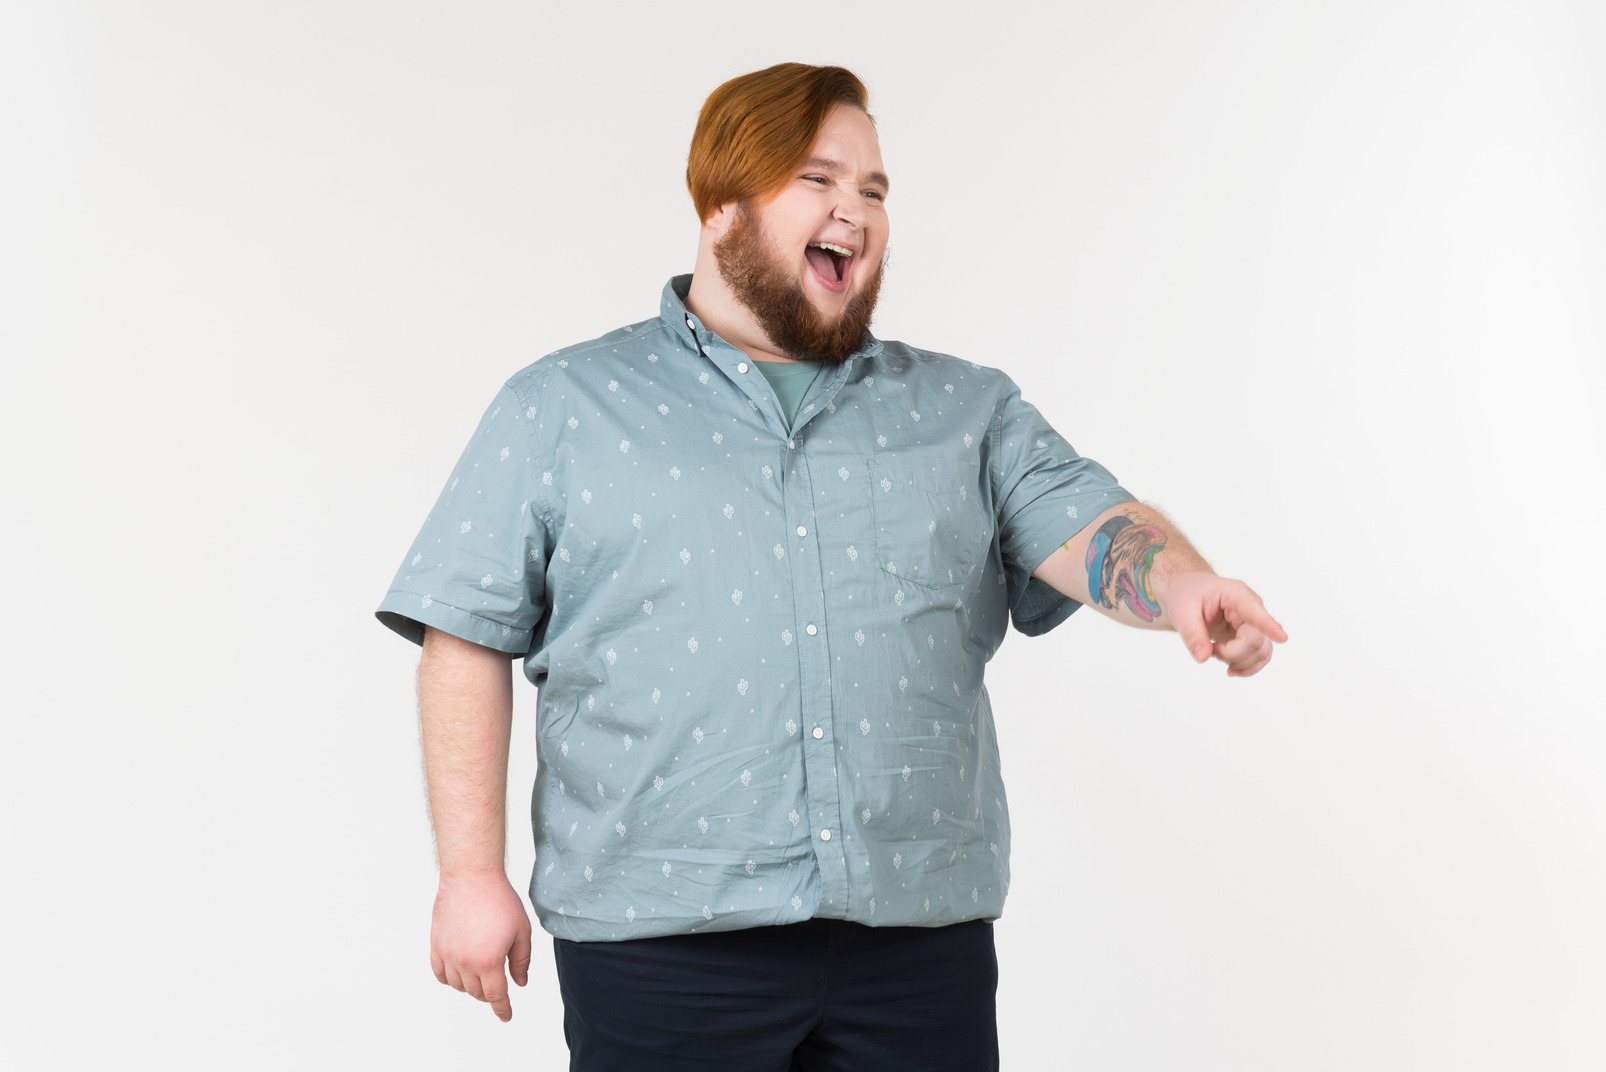 A fat man pointing his finger at something and laughing